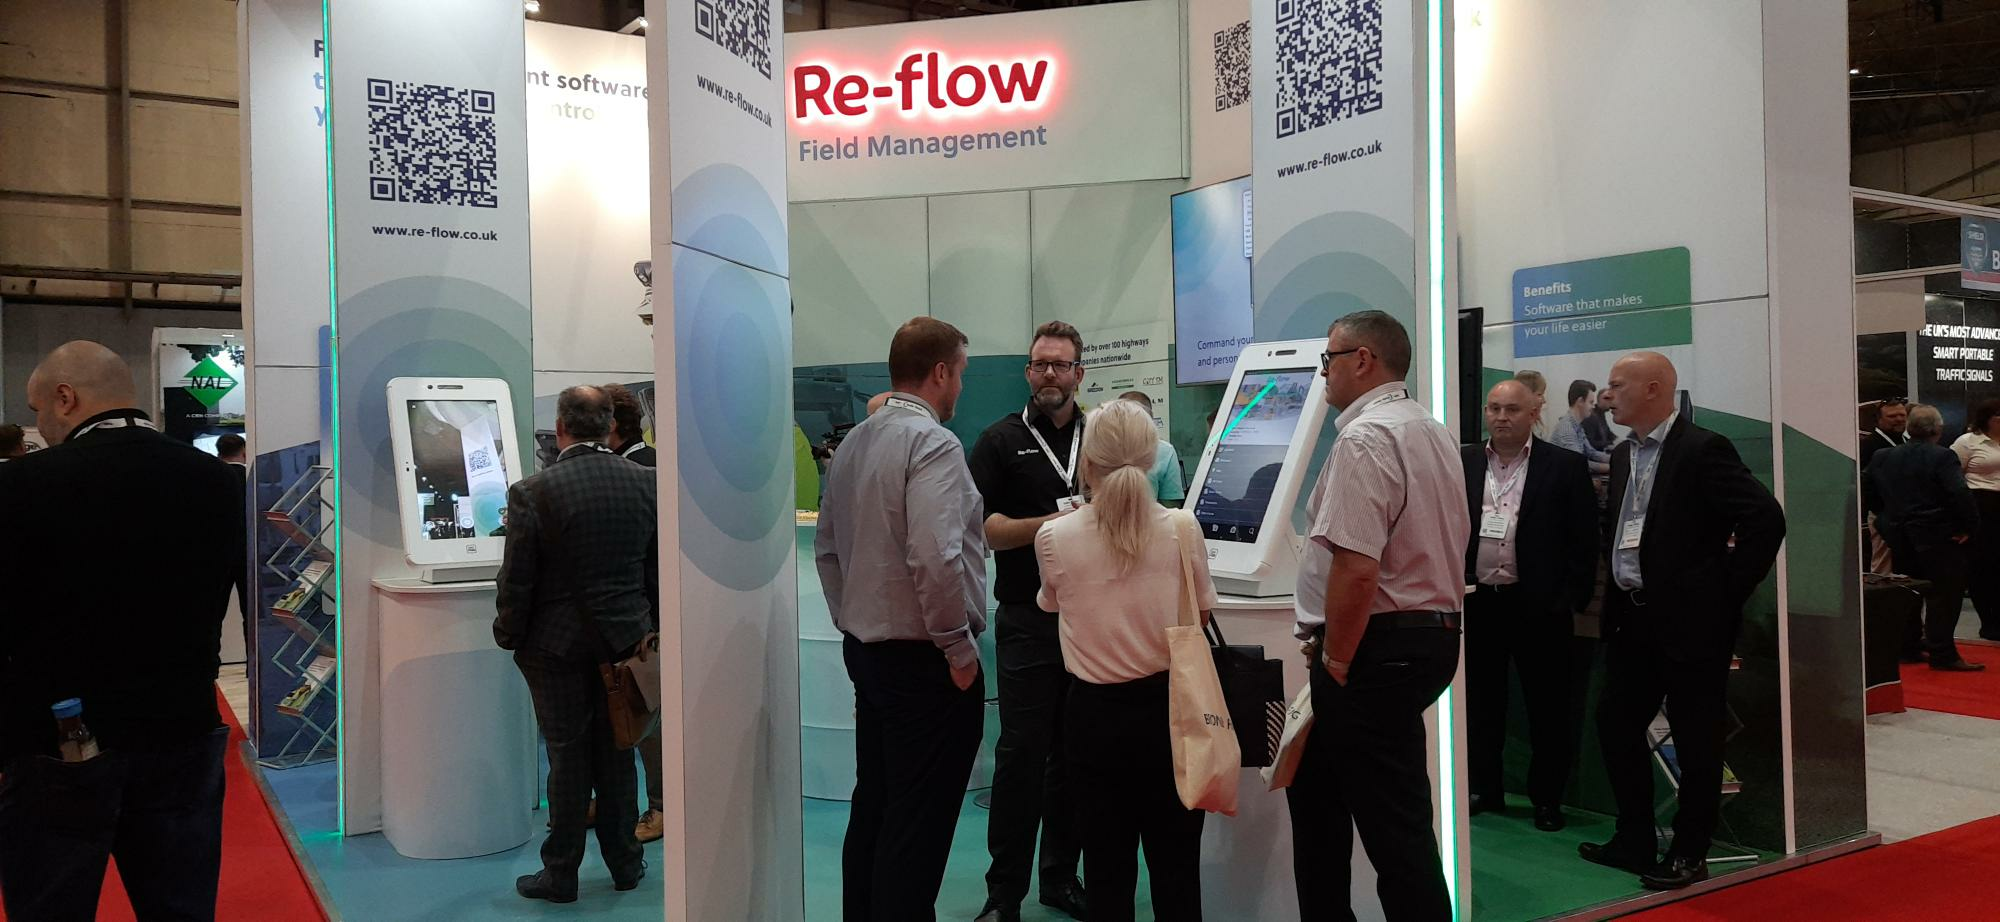 Re flow Stand 5